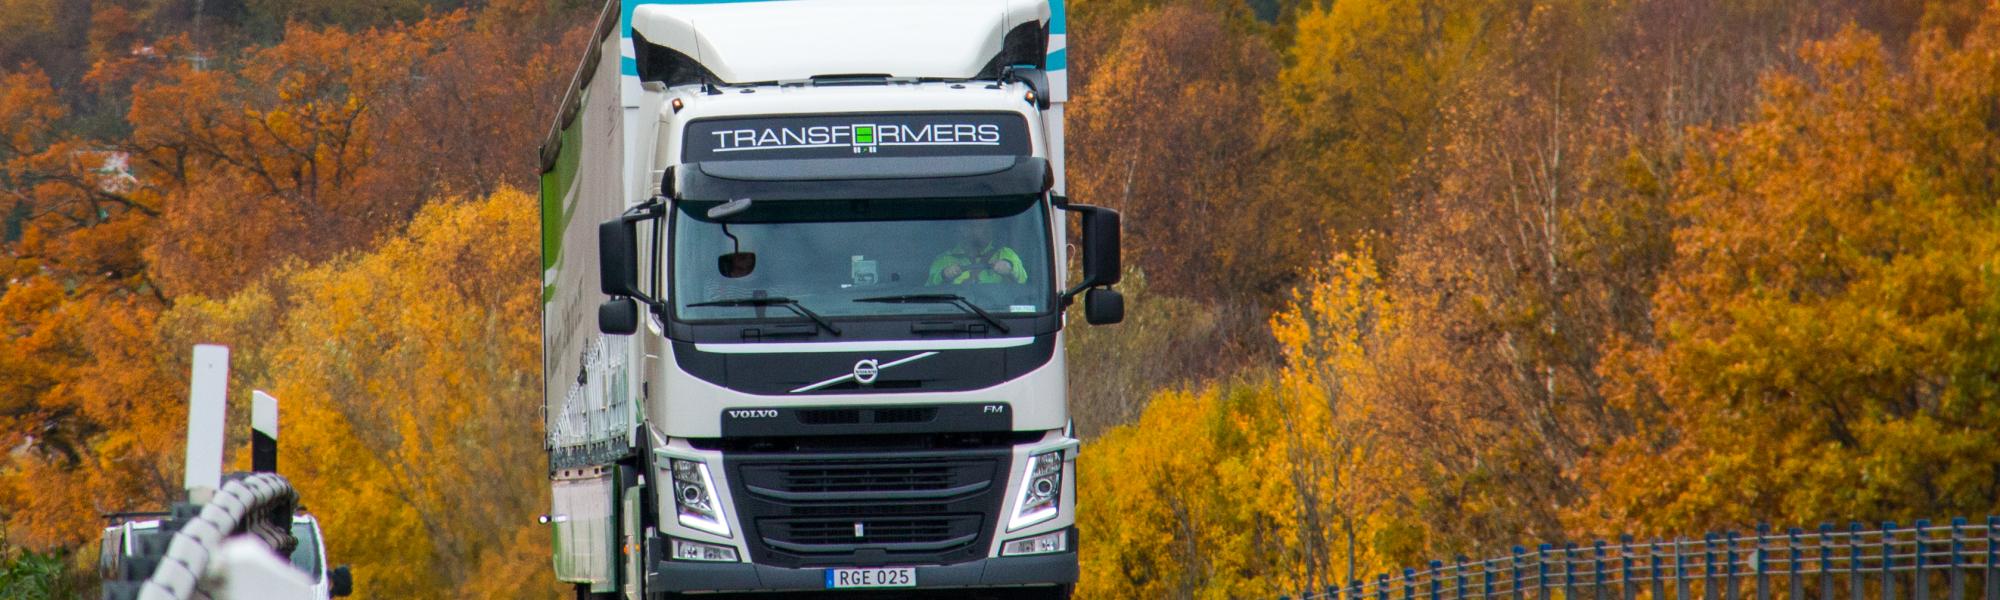 New truck-trailer design makes Transformers a reality